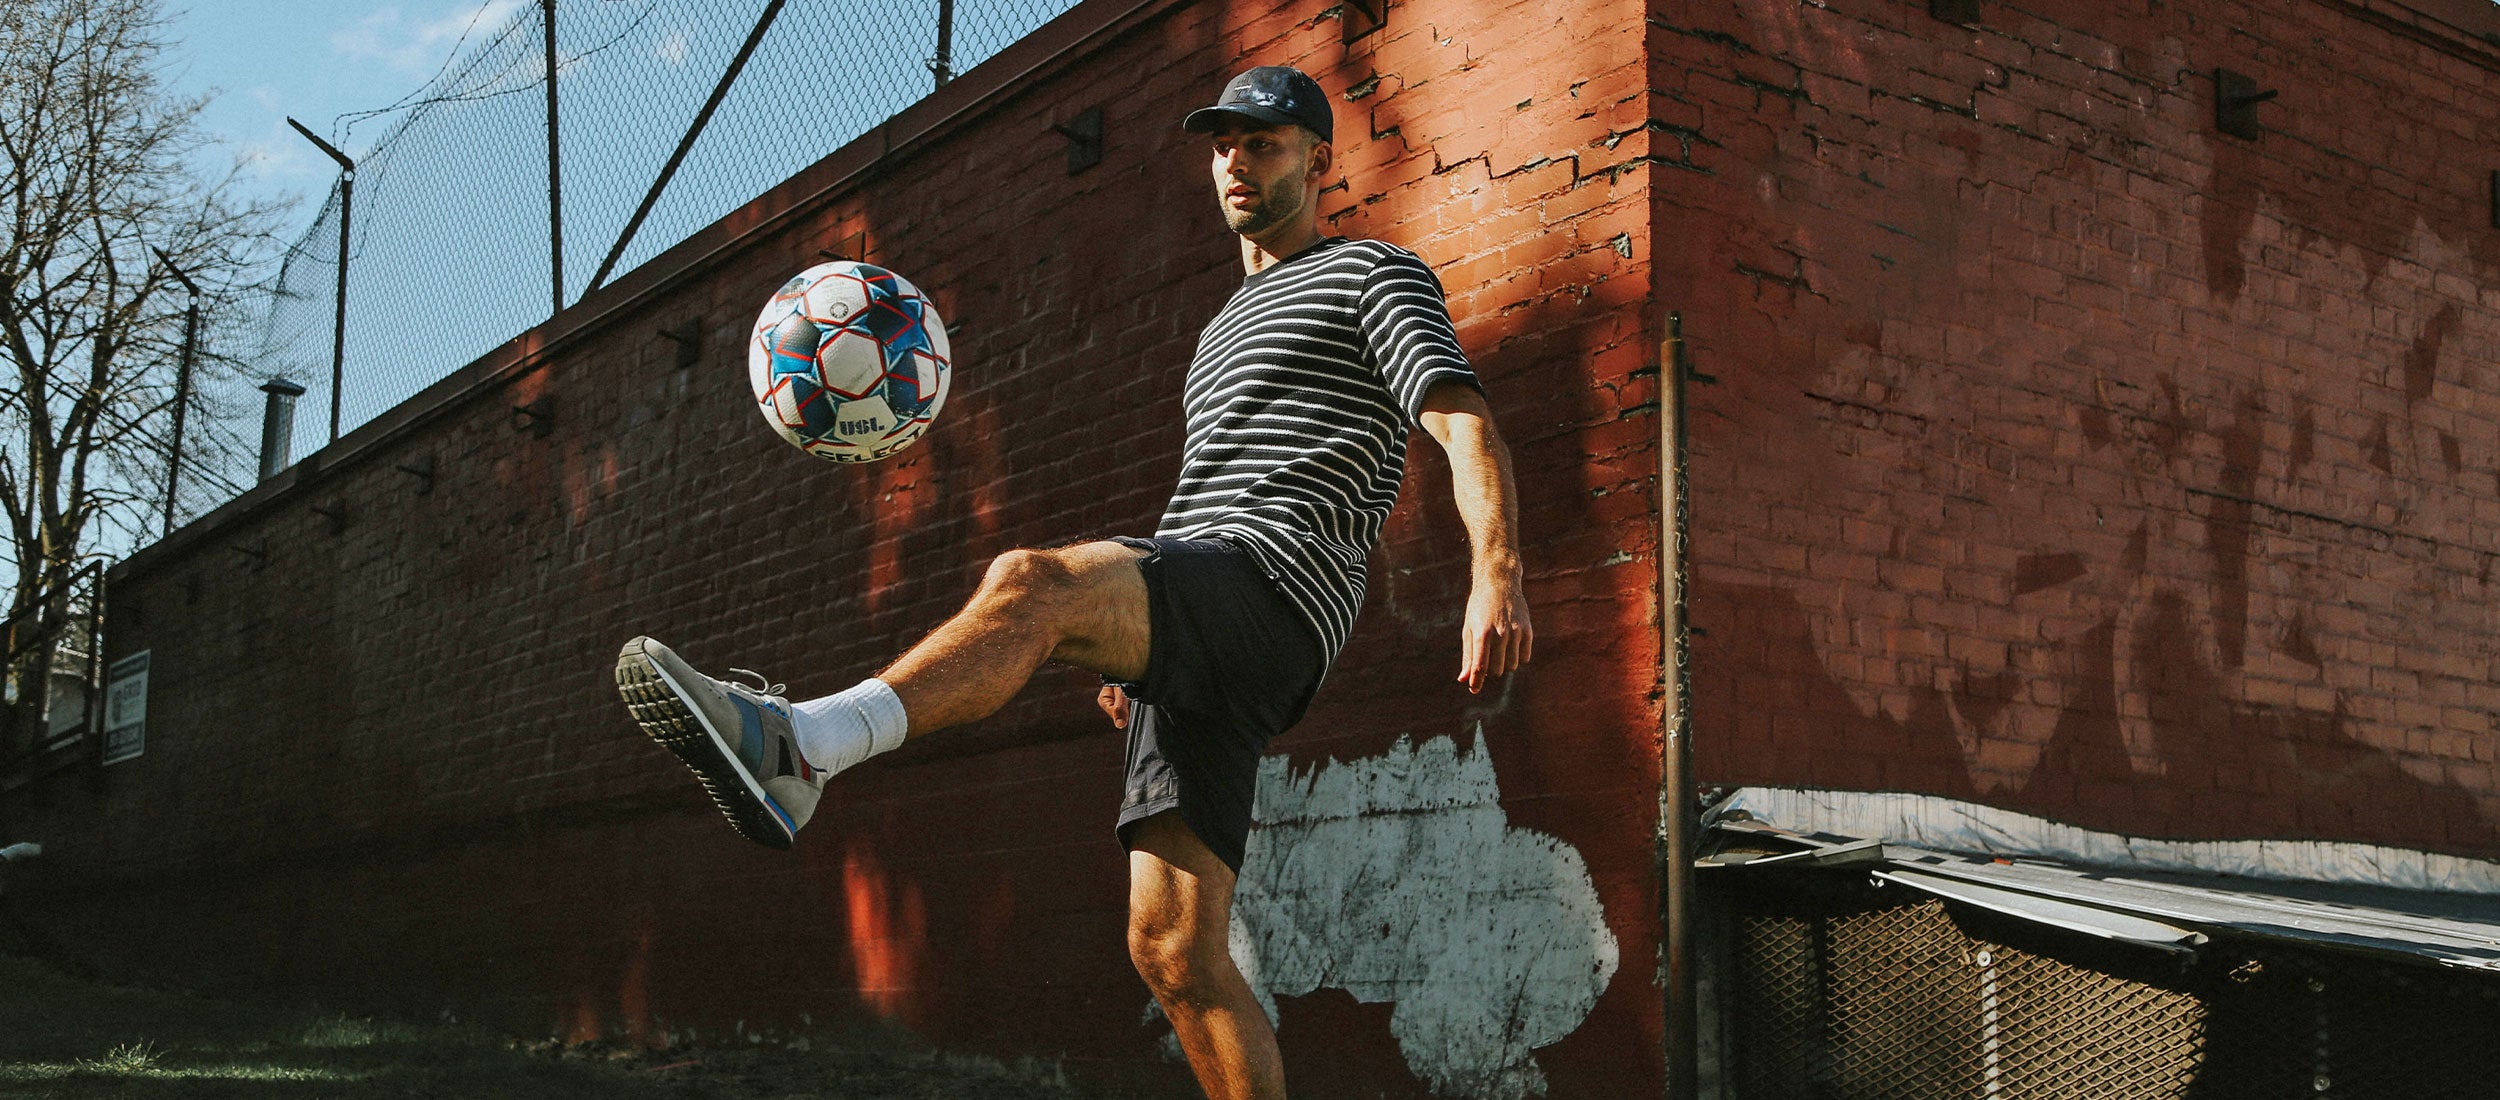 A young man juggling a football, or soccer ball, in front of a red brick wall.